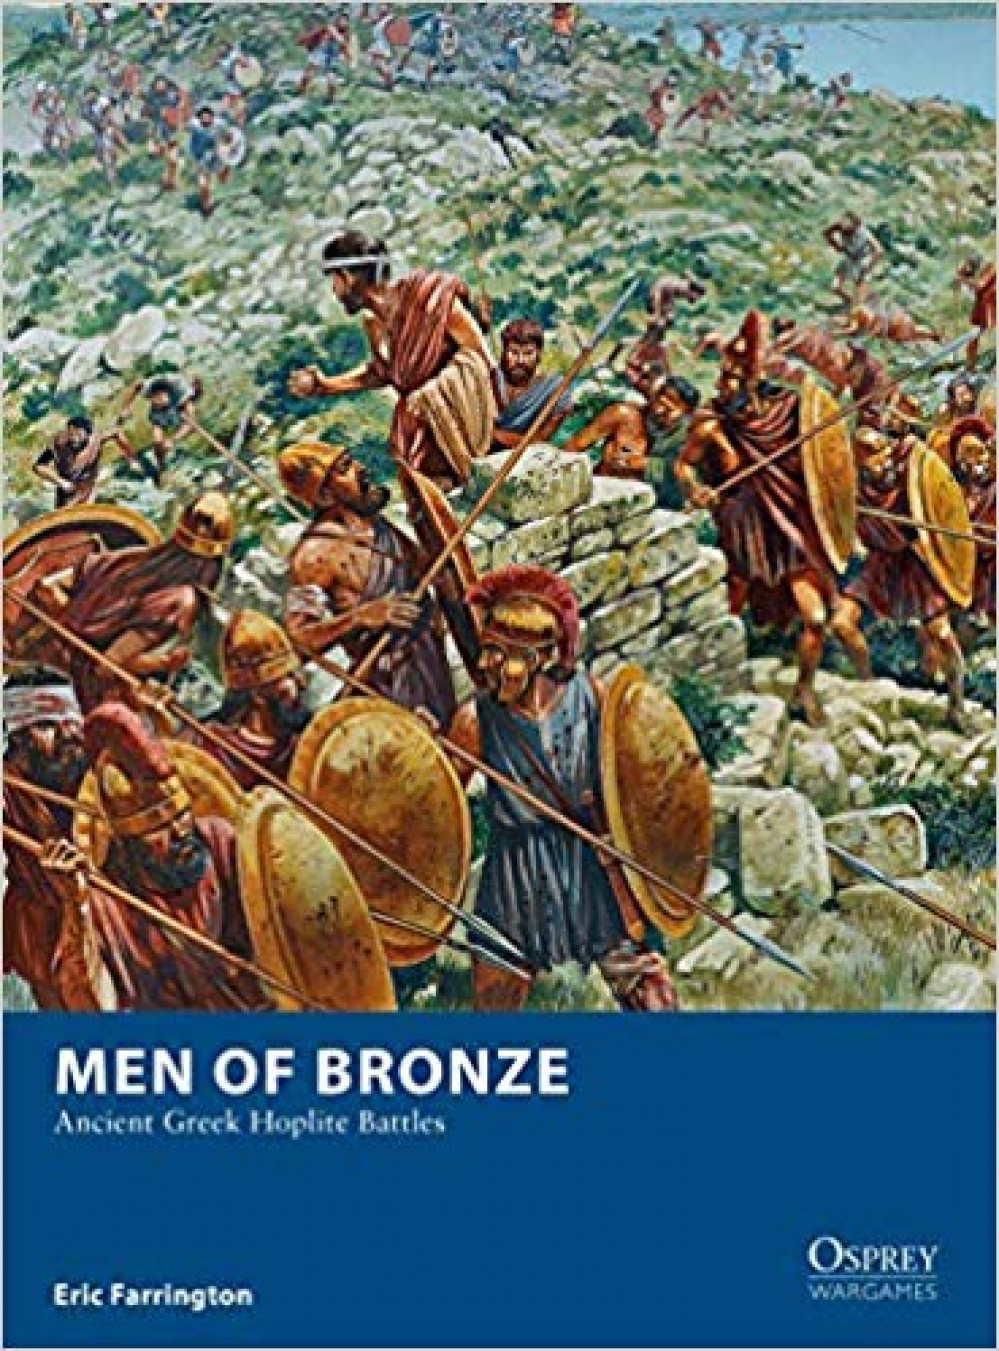 Hail to the Men of Bronze